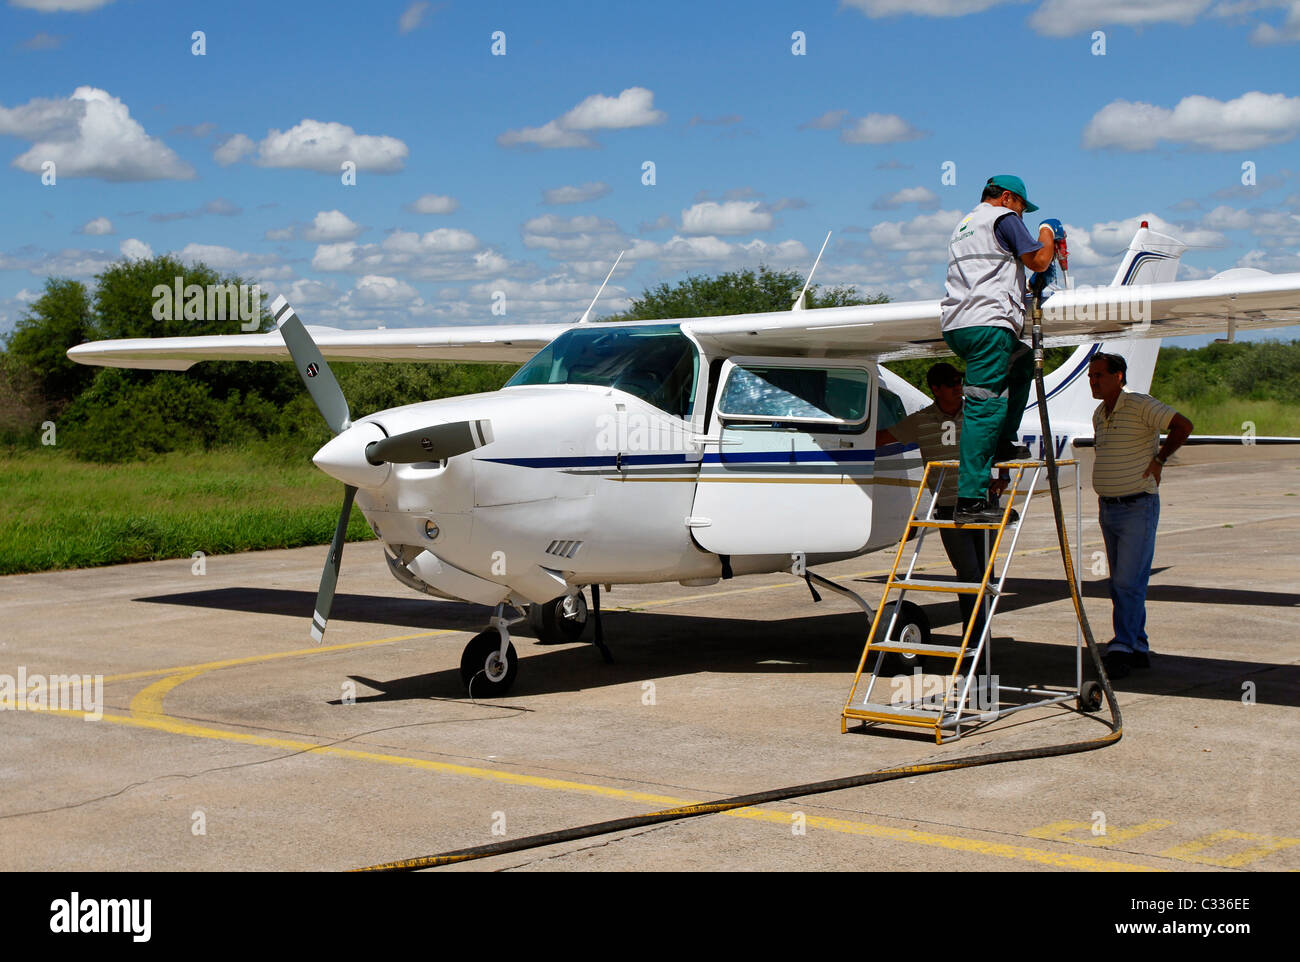 Refuelling a small aircraft at Mariscal Estigarribia airport, Paraguay Stock Photo